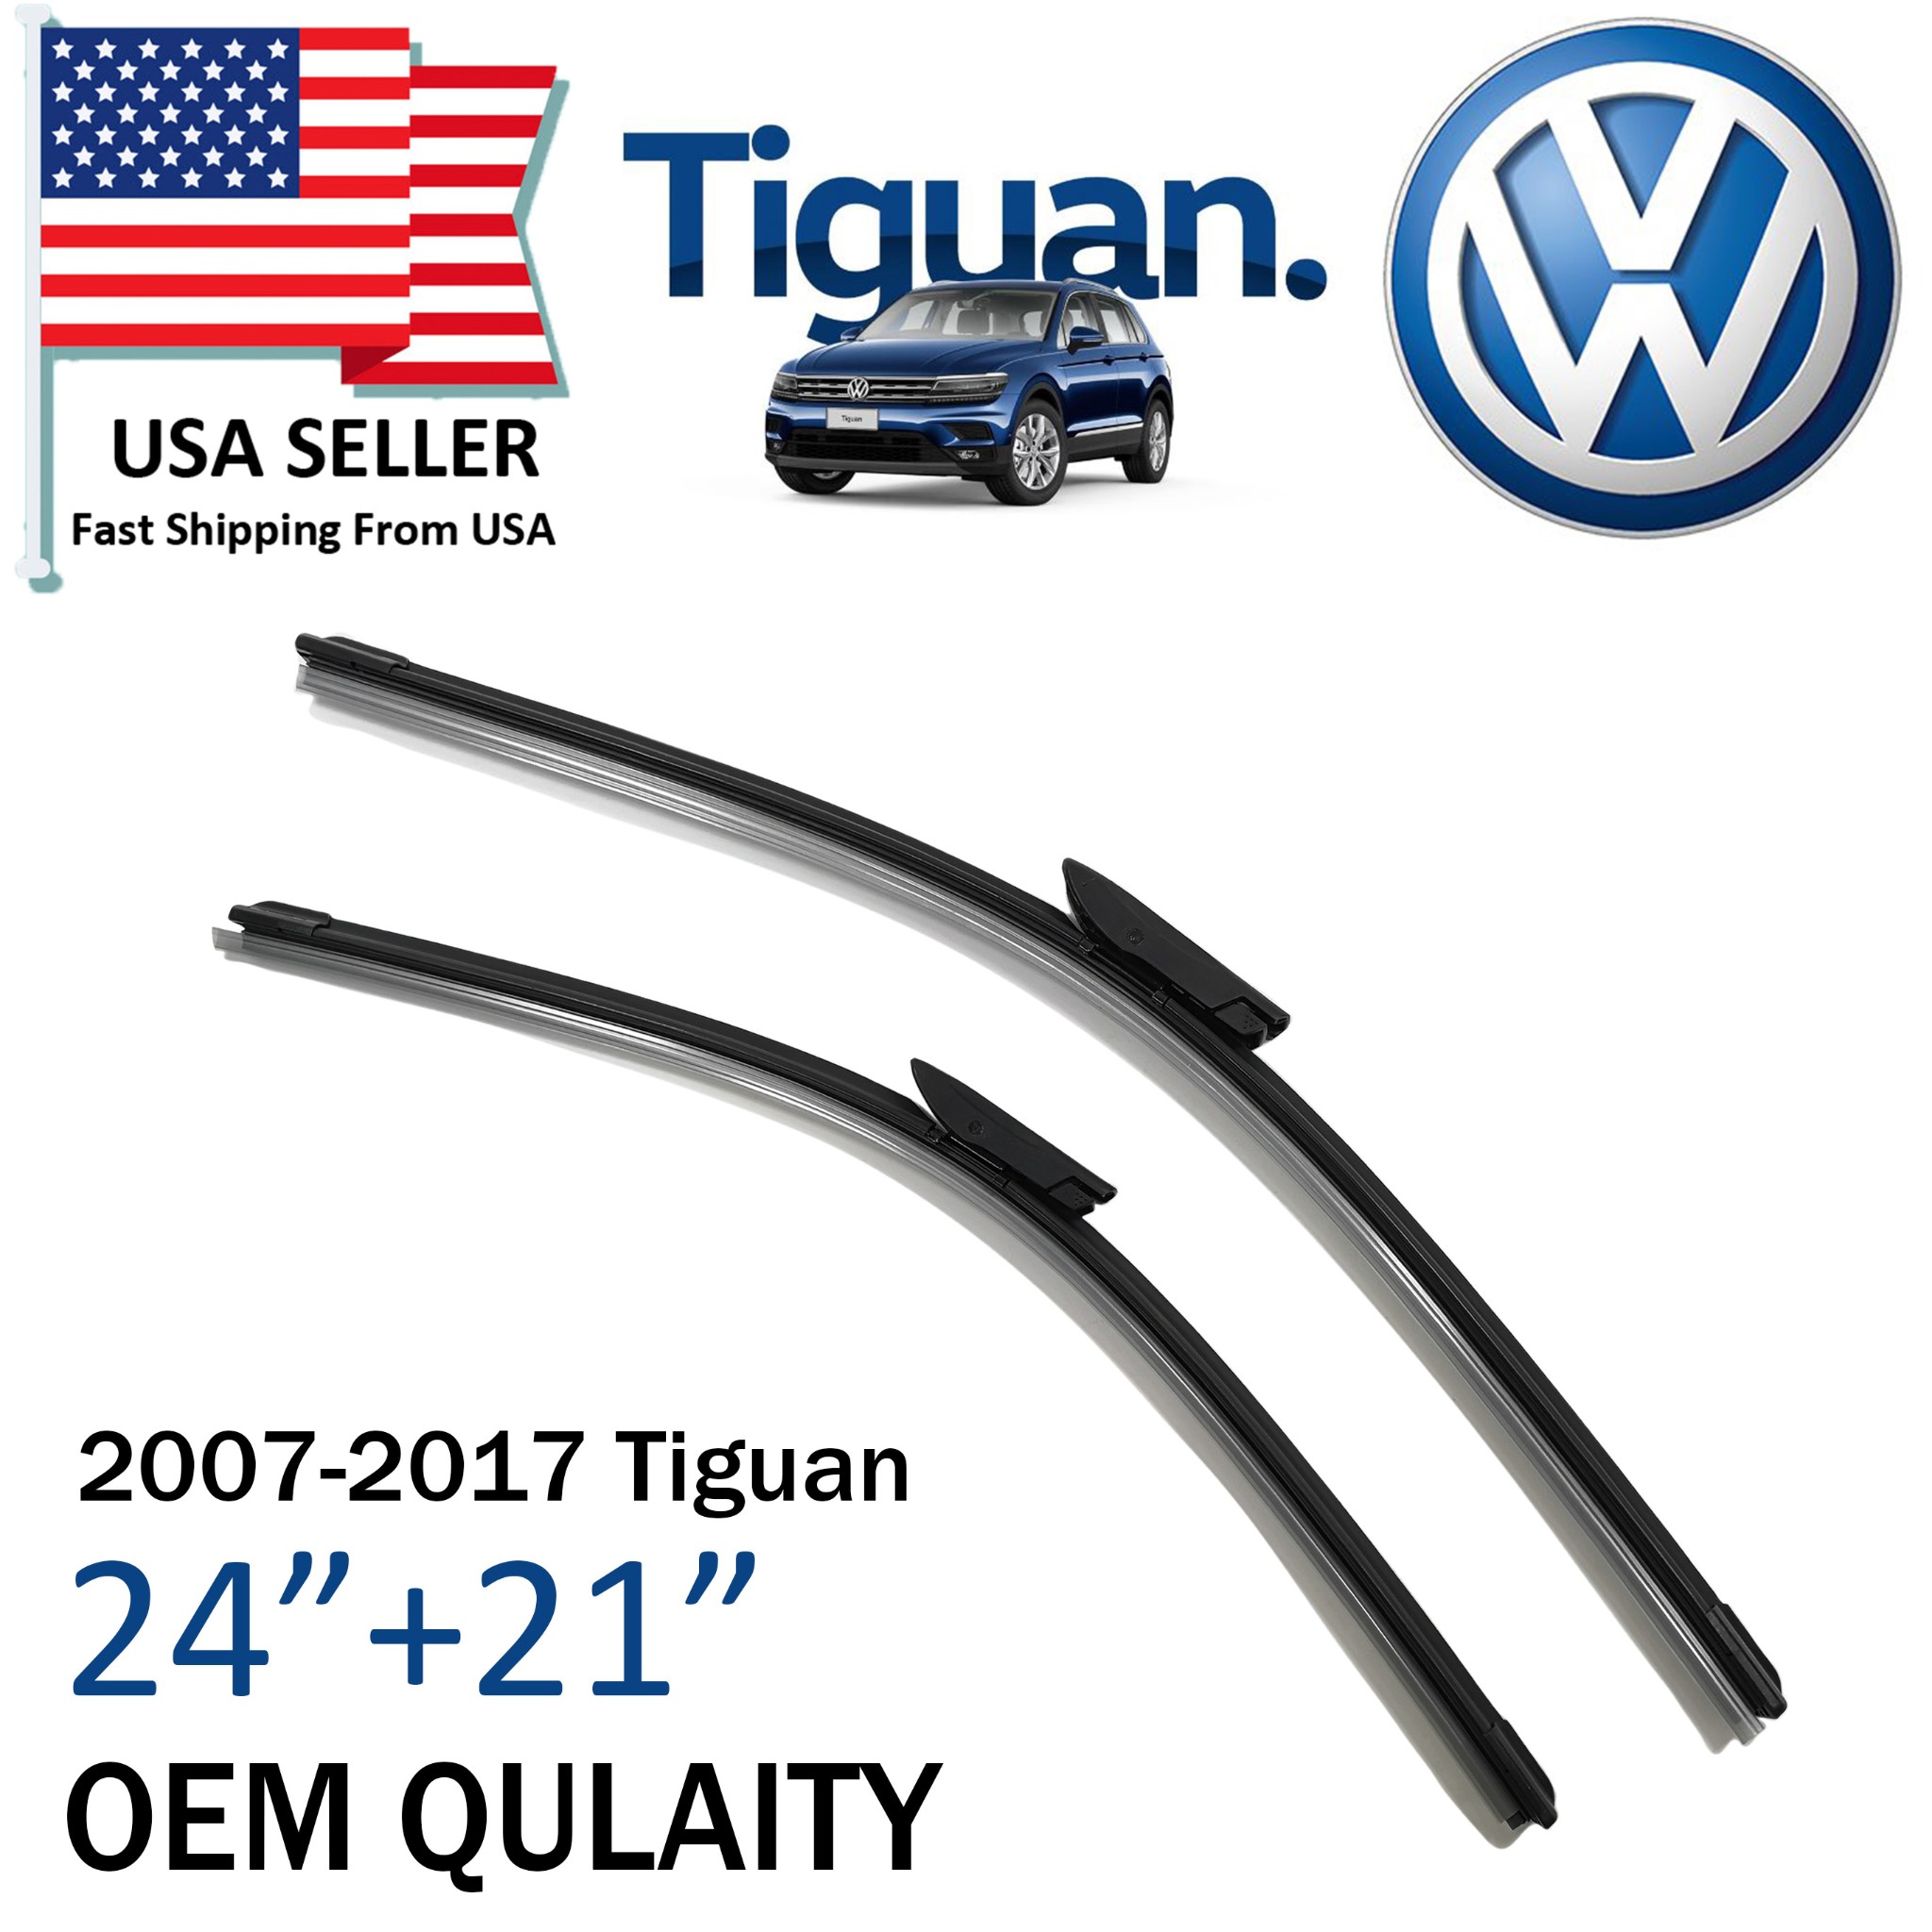 NeW Great OEM Quality 24"+ 21" Wiper Blades for 2007-2017 For Volkswagen Tiguan | eBay 2020 Gmc Acadia Rear Wiper Blade Size